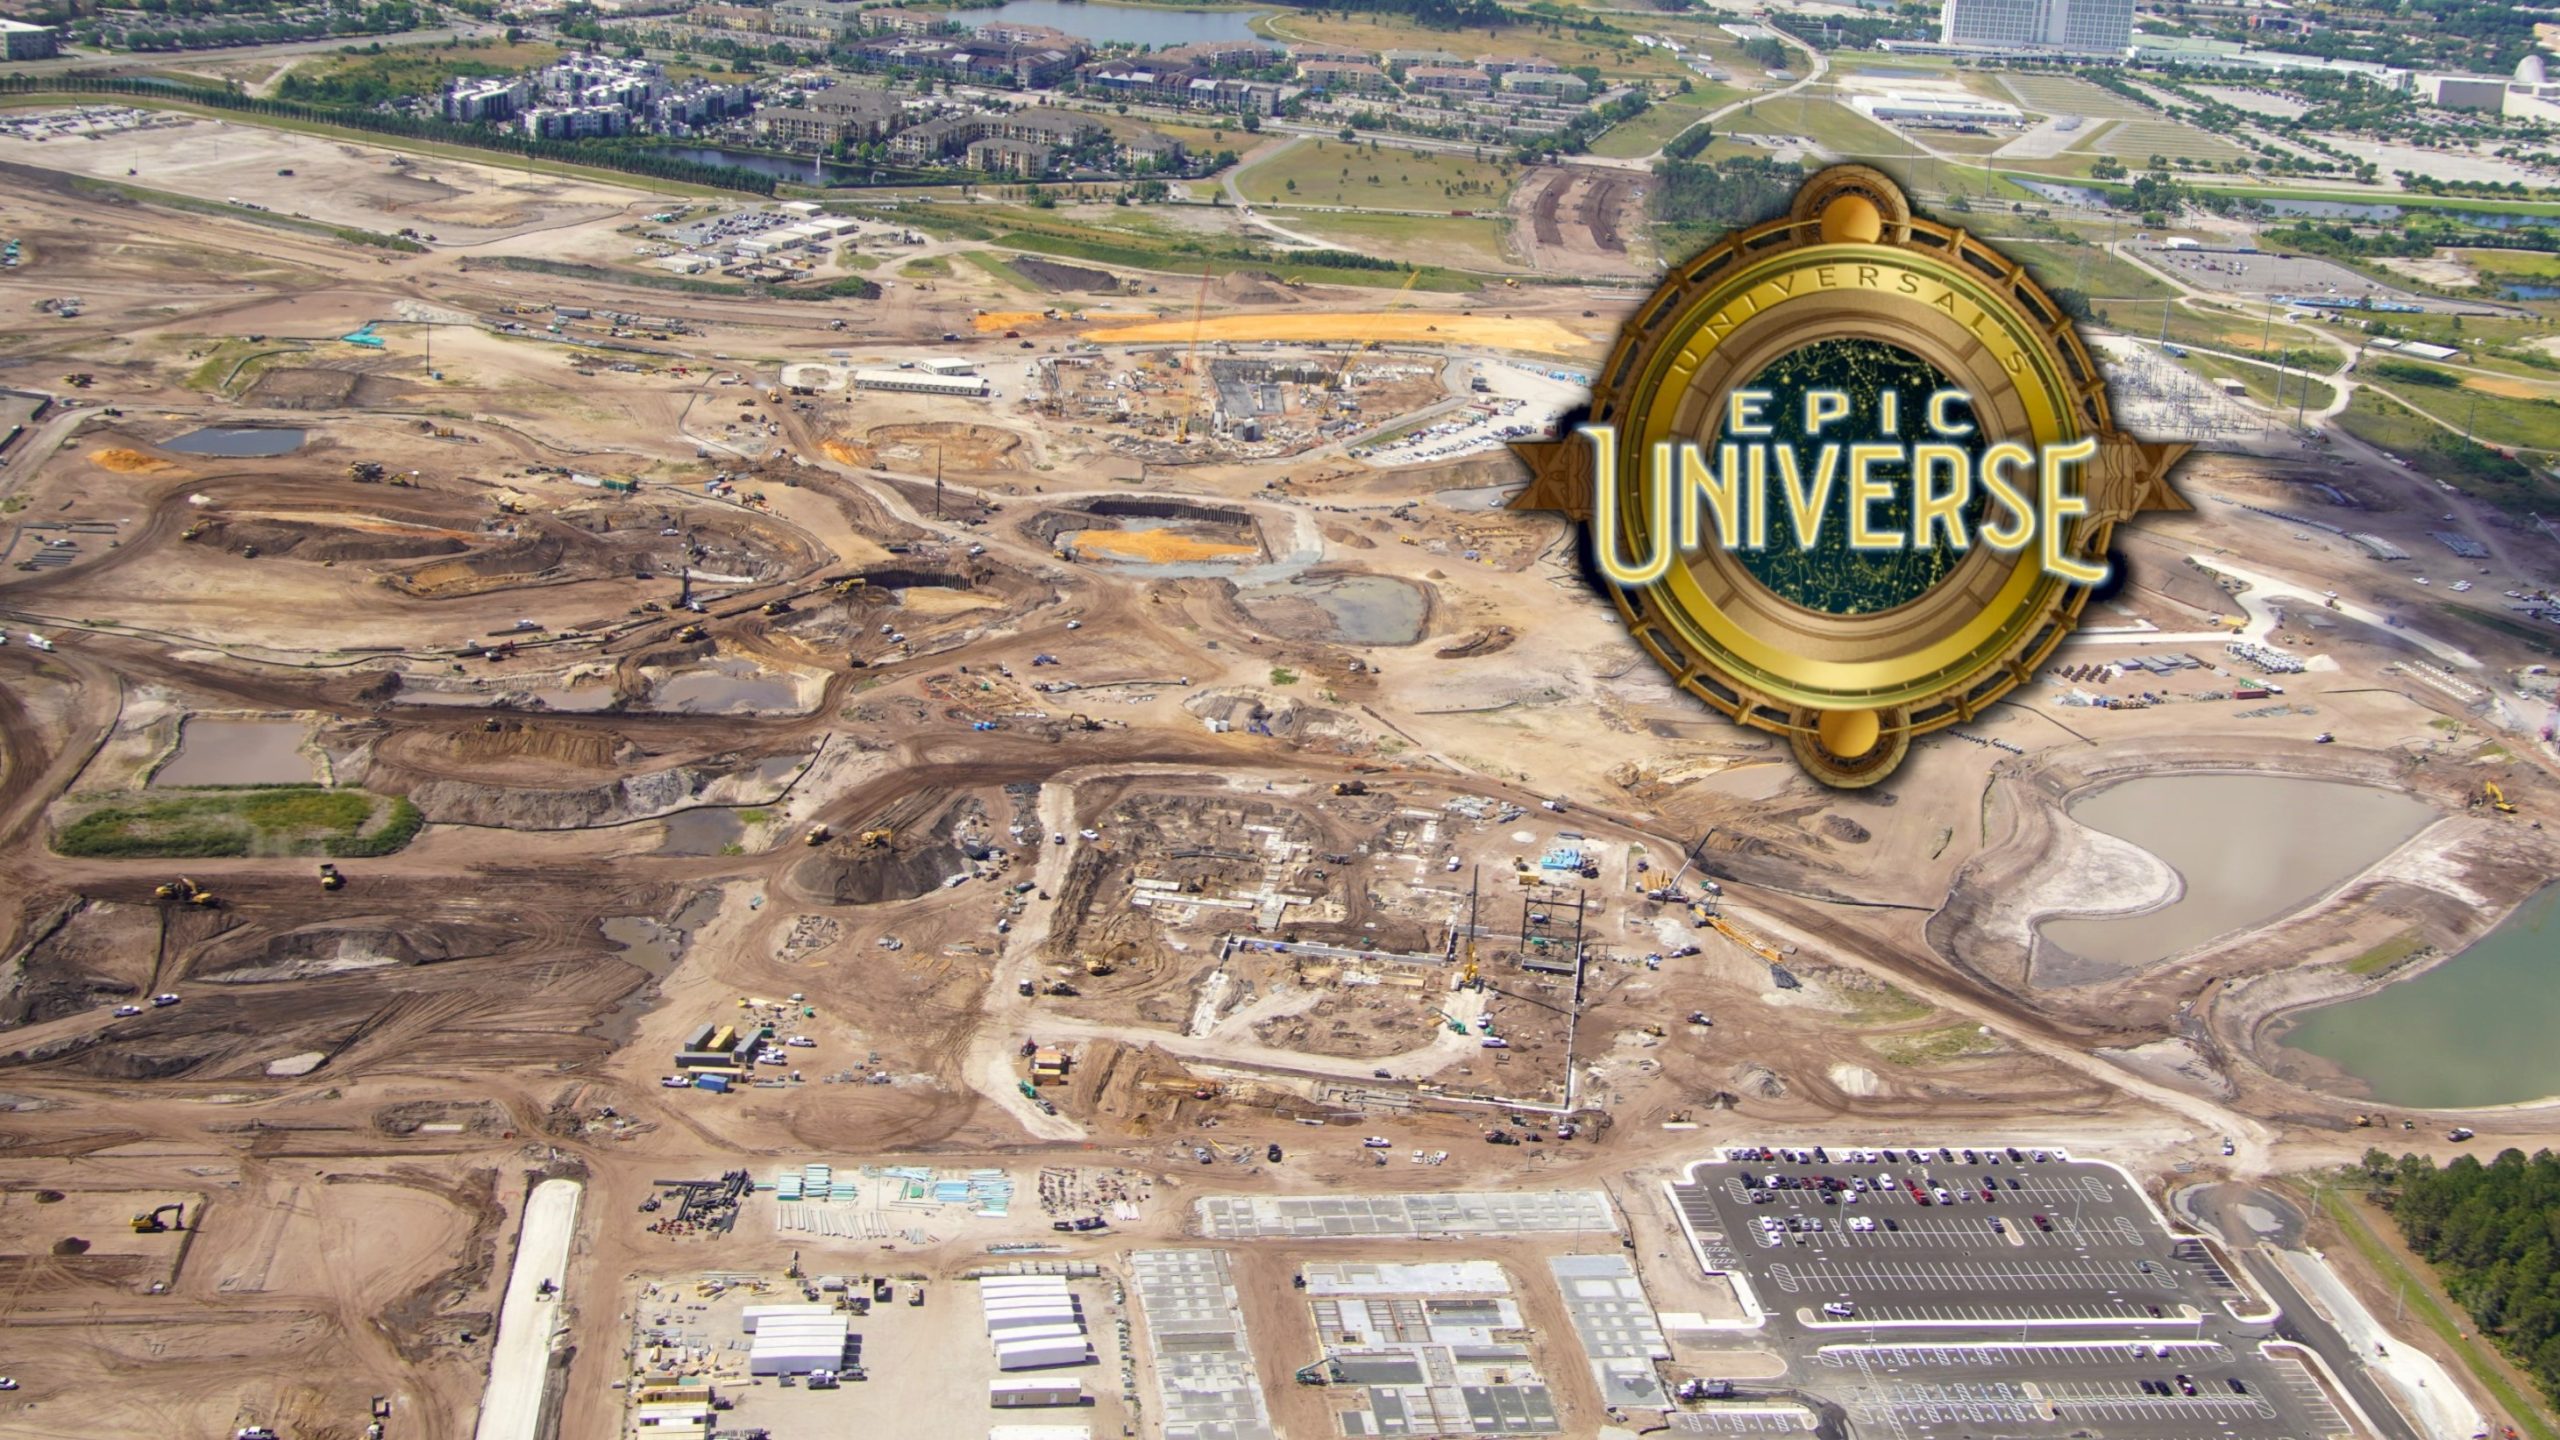 PHOTO REPORT: Universal Orlando Resort 4/19/21 (Prime Parking Price Drops,  VelociCoaster Team Member Wardrobe, Playground Areas Preparing to Reopen,  Class of 2021 Photo Op, and More) - WDW News Today